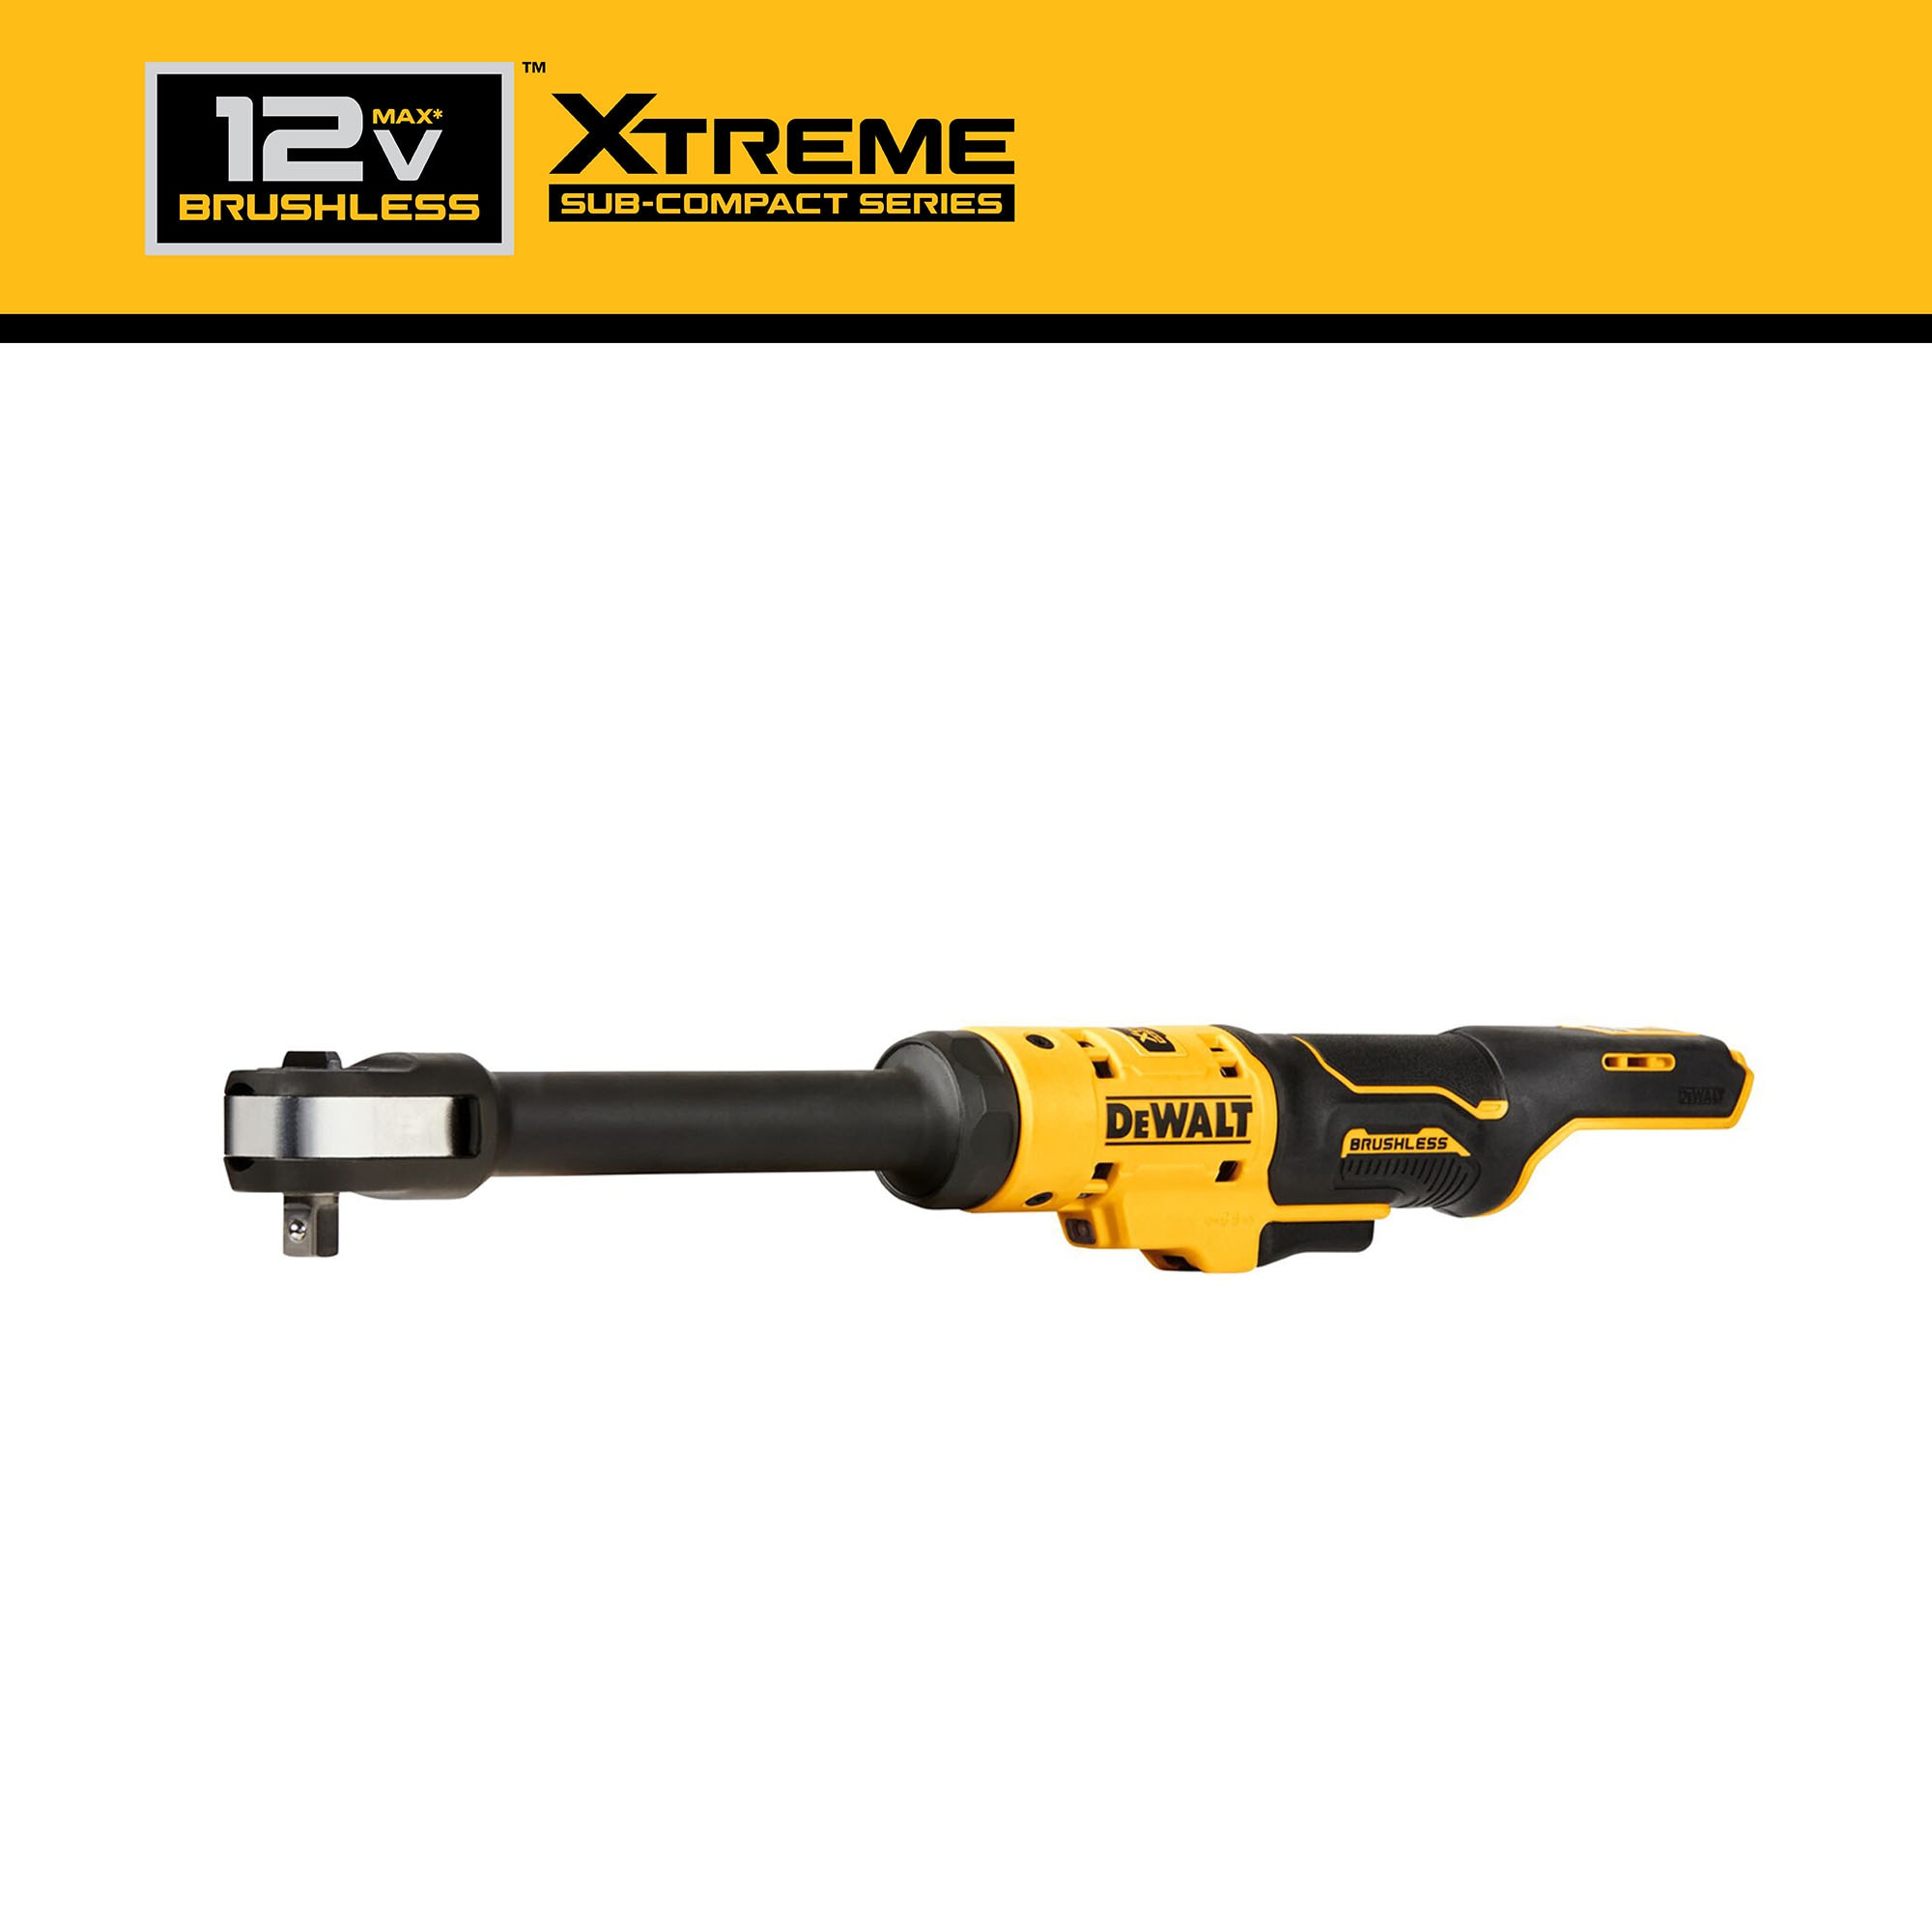 DEWALT XTREME 20-volt Max Variable Speed Brushless 3/8-in Drive